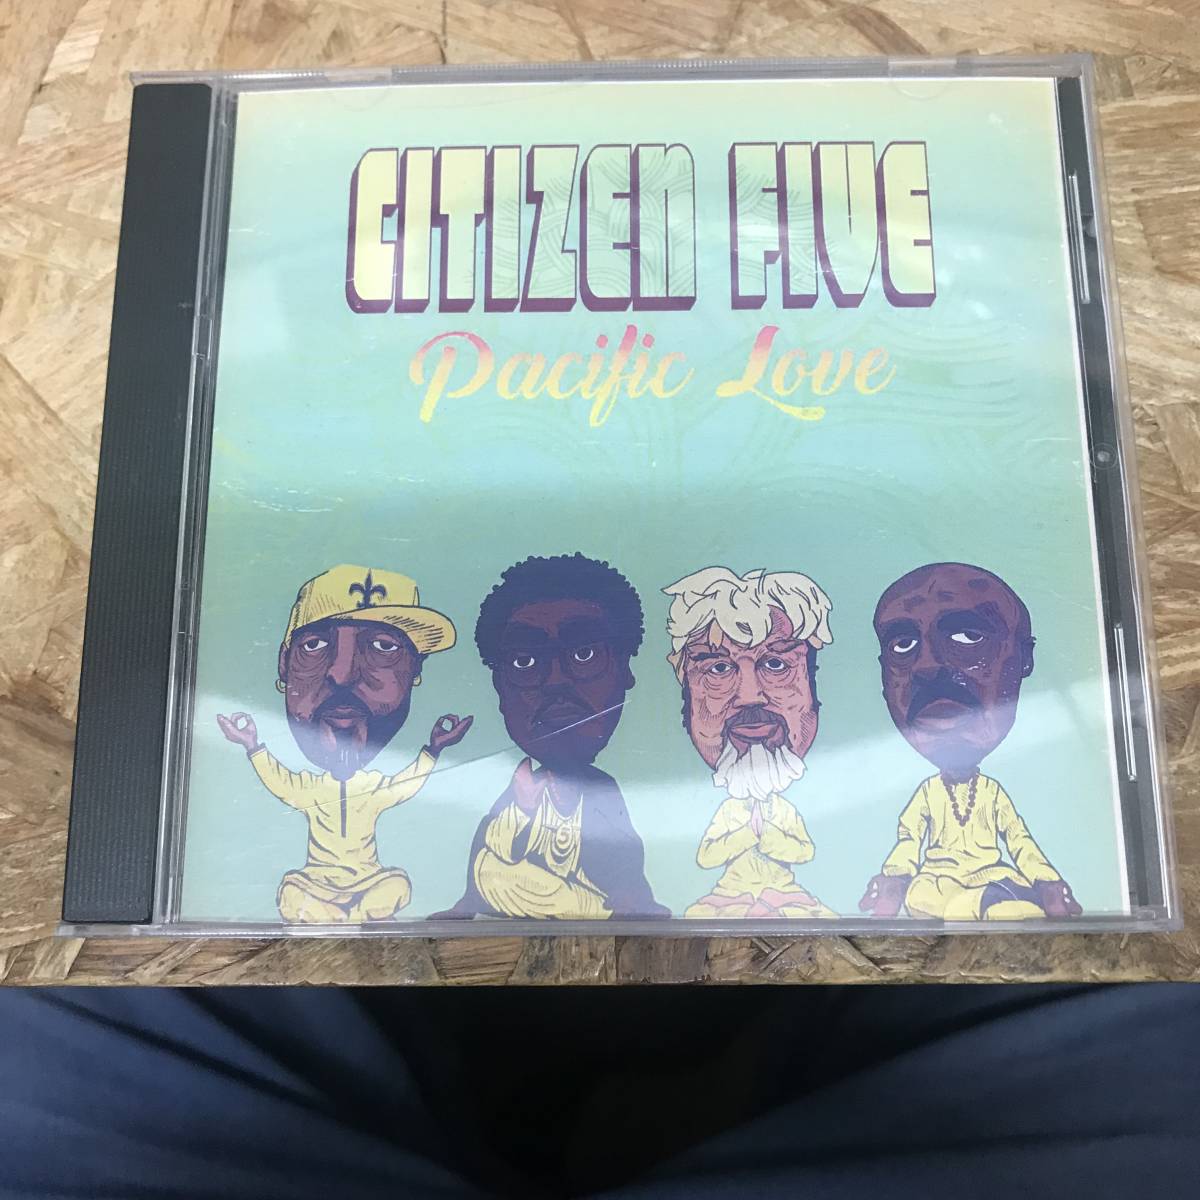 ● HIPHOP,R&B CITIZENFIVE - PACIFIC LOVE アルバム,INDIE CD 中古品_画像1